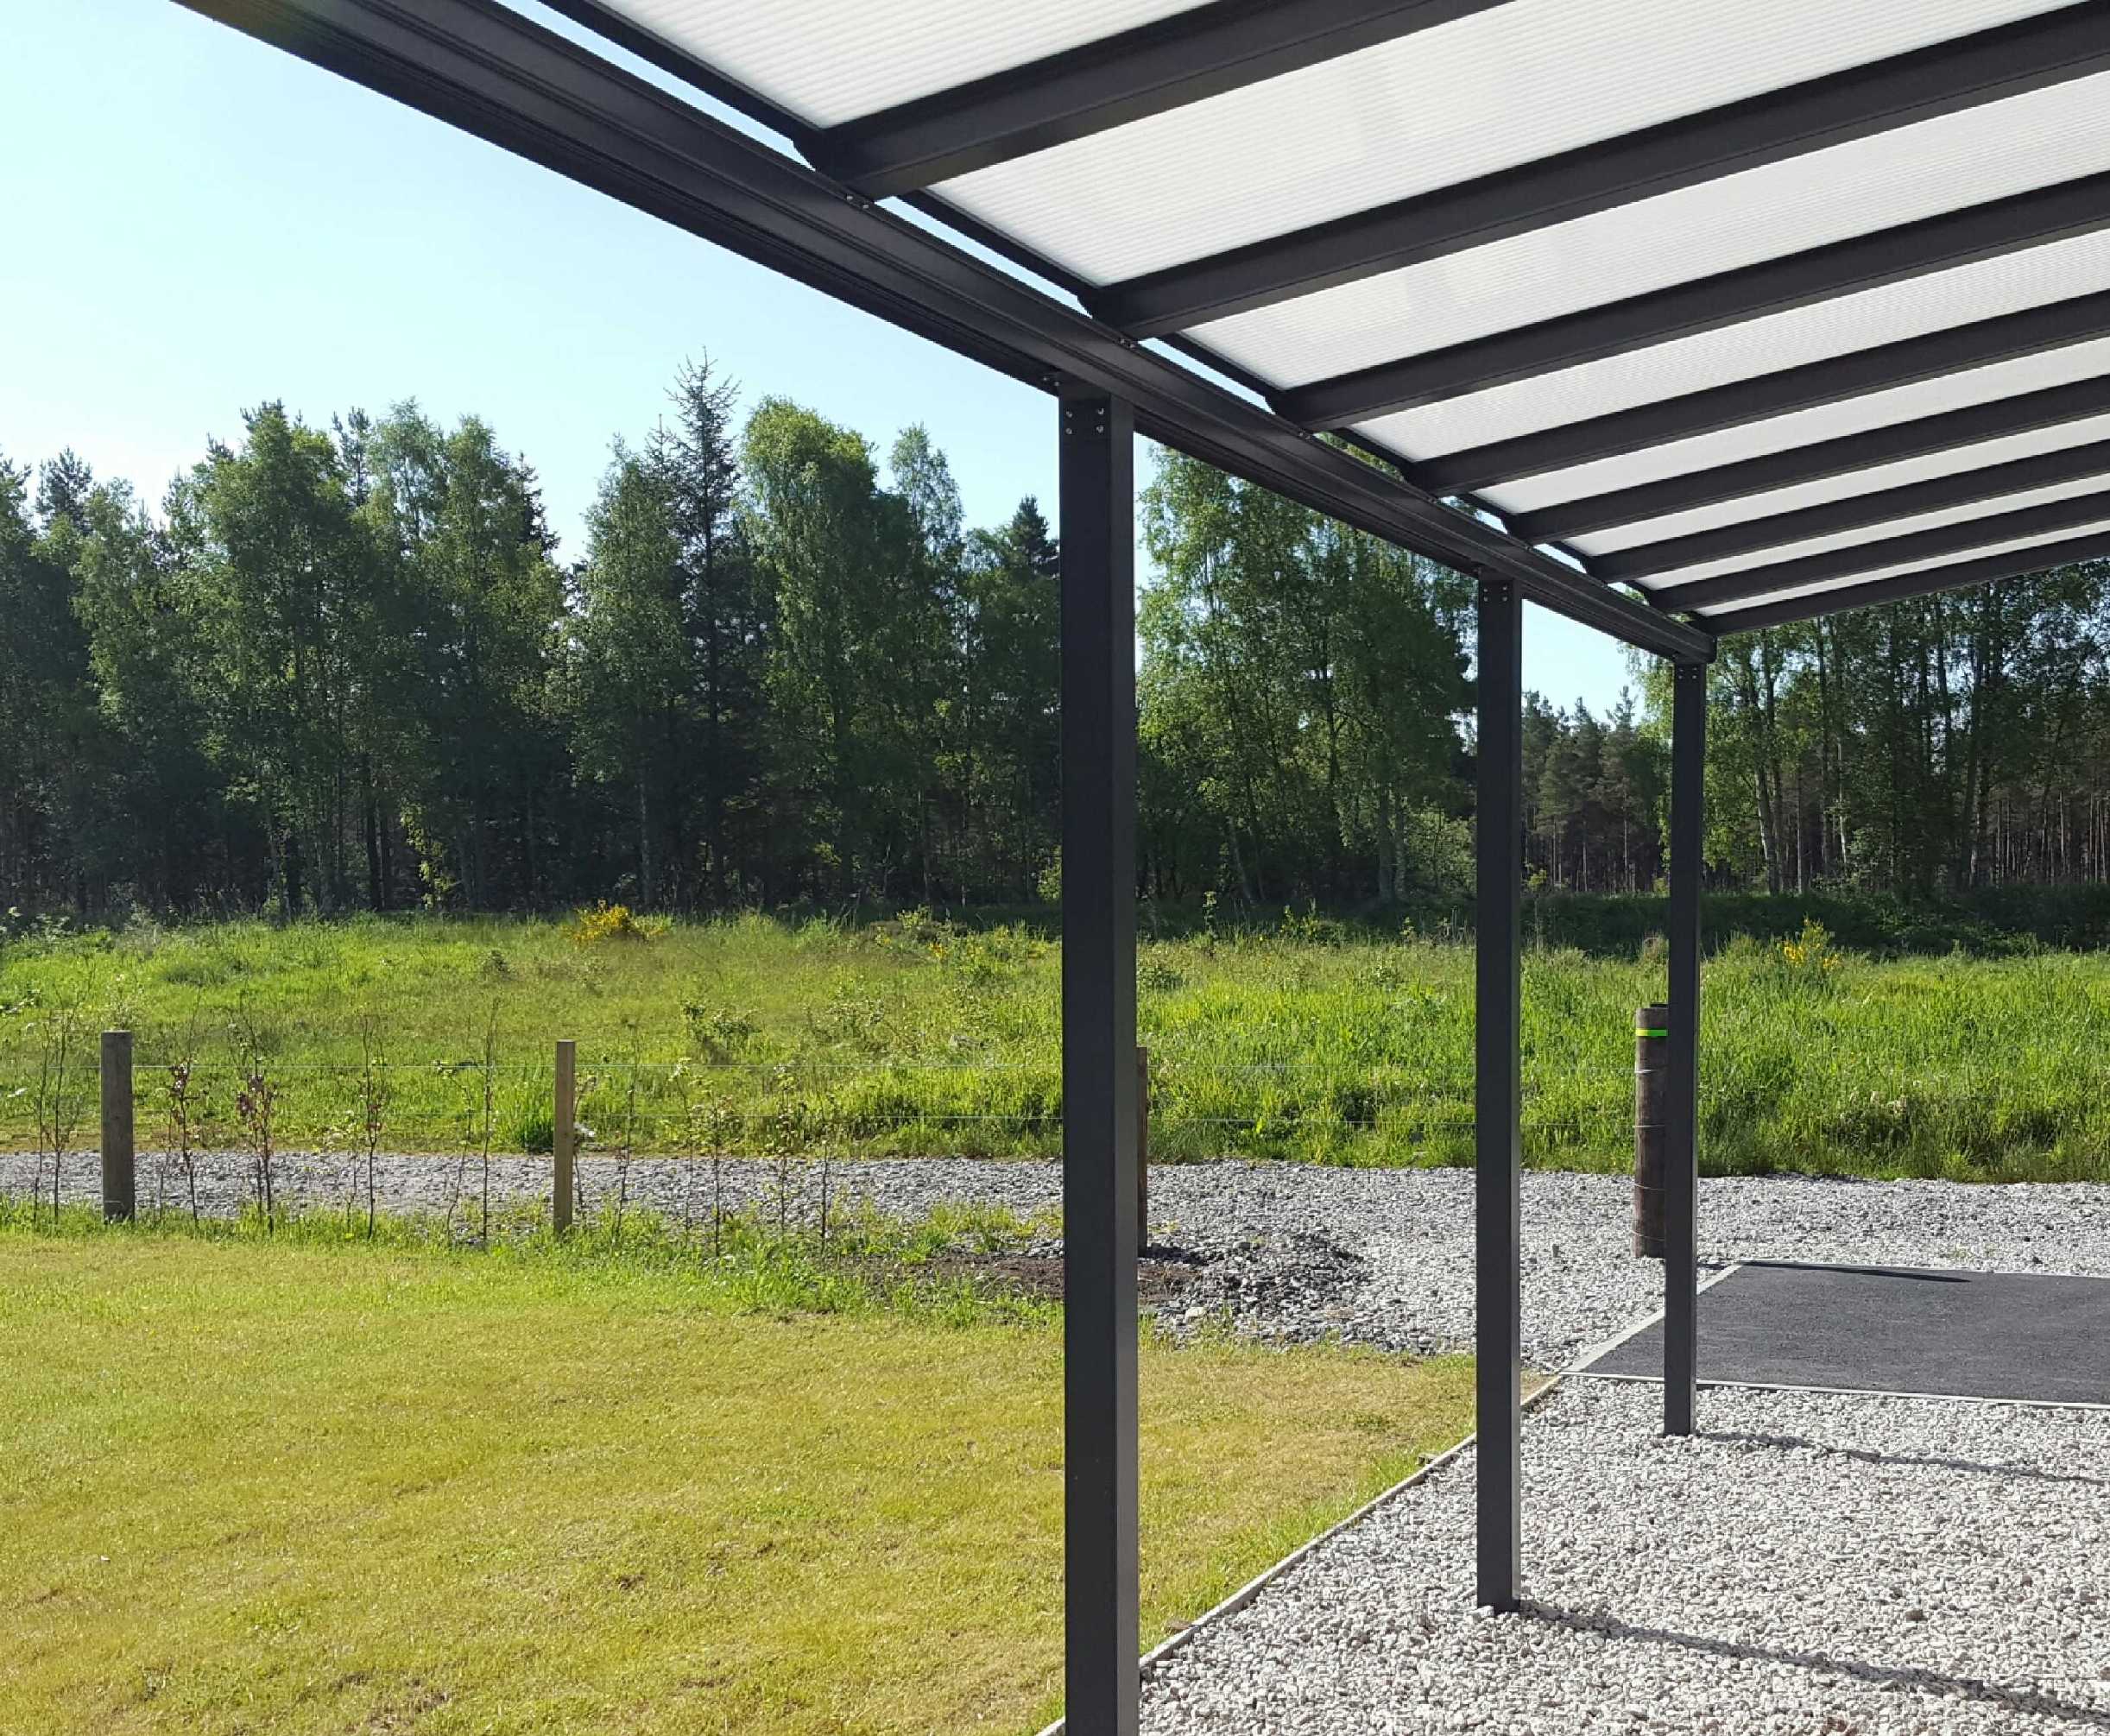 Omega Smart Lean-To Canopy, Anthracite Grey, 6mm Glass Clear Plate Polycarbonate Glazing - 7.0m (W) x 1.5m (P), (4) Supporting Posts